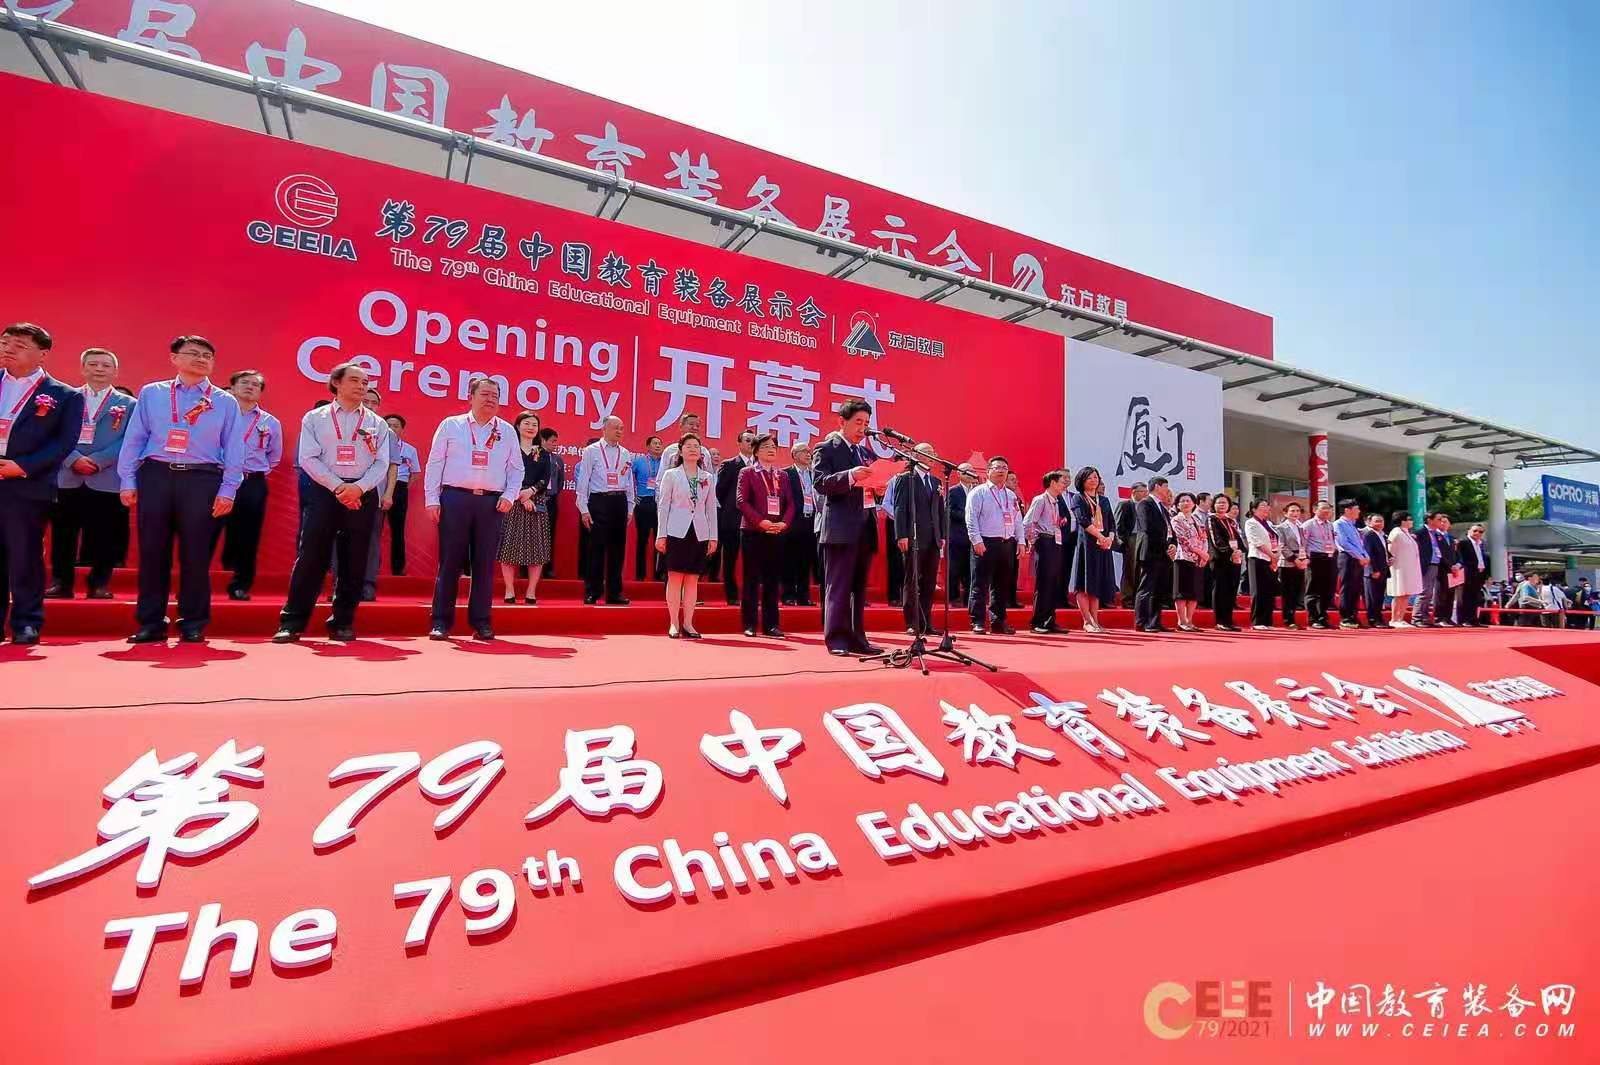 DISEN Shows on the 79th China Educational Equipment Exhibition